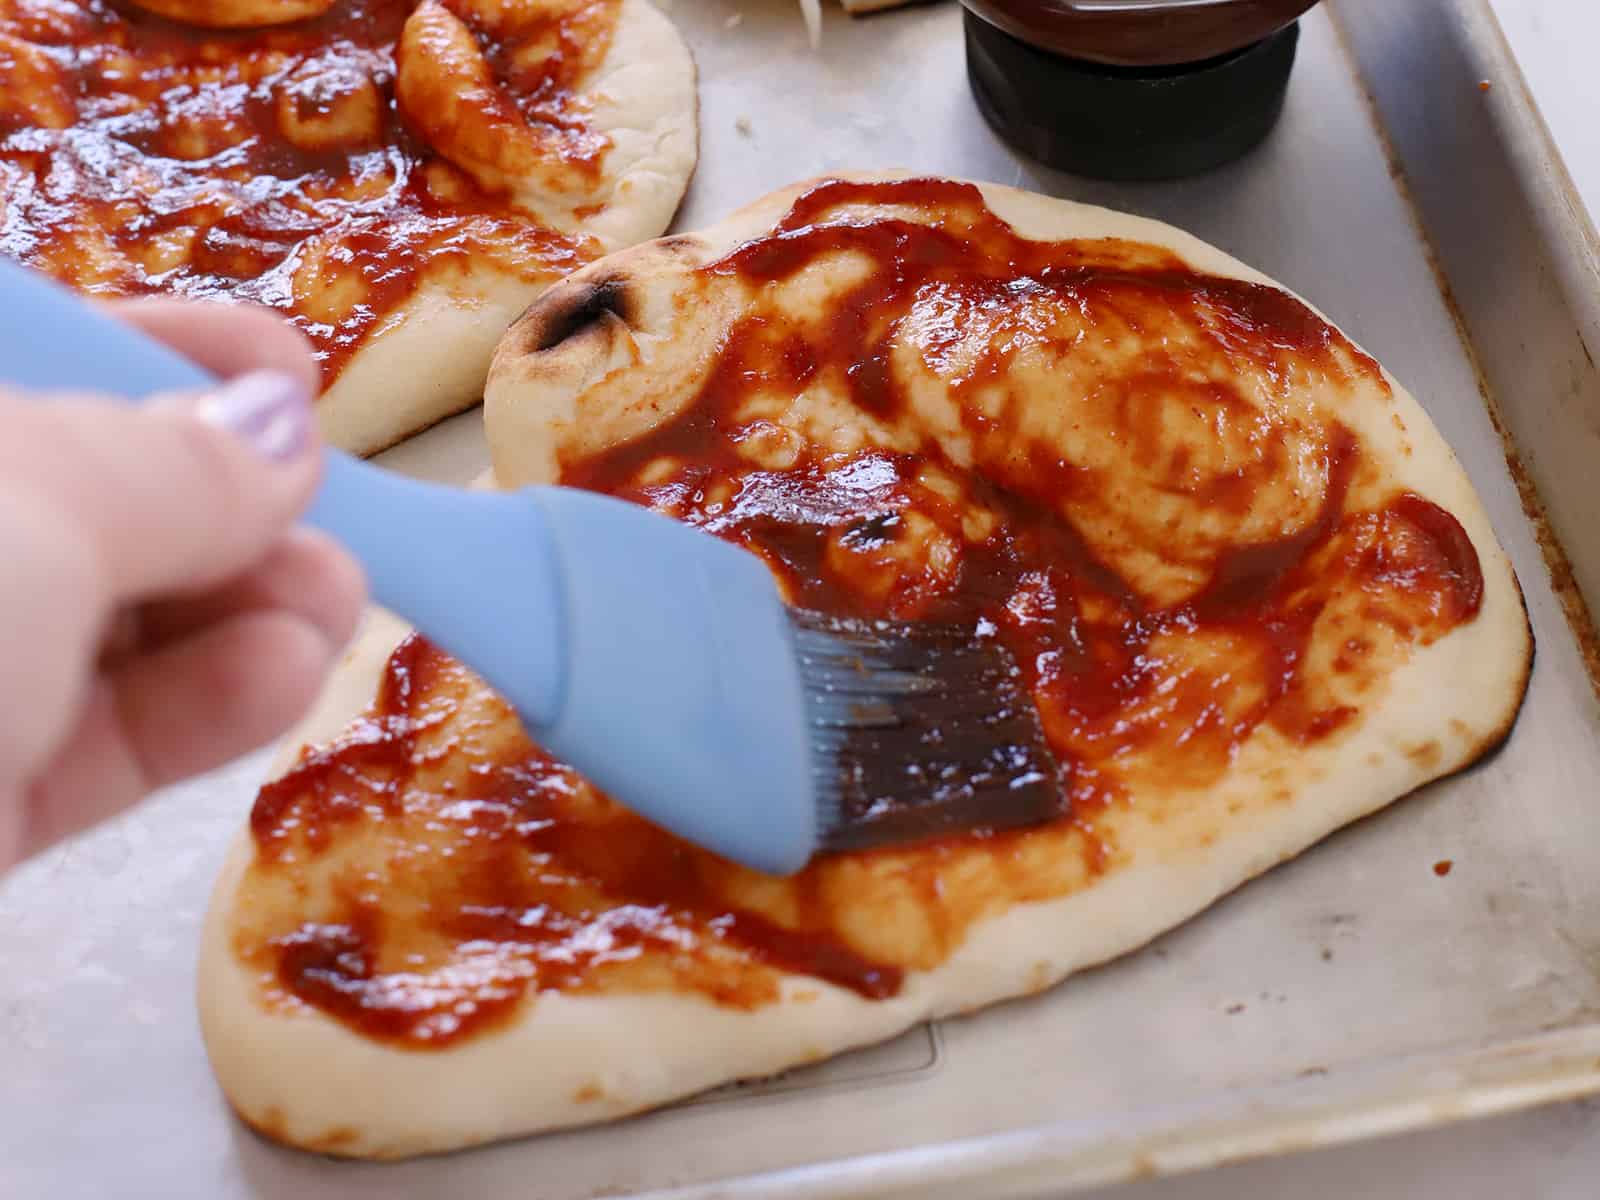 Barbecue sauce being spread on a piece of flatbread.